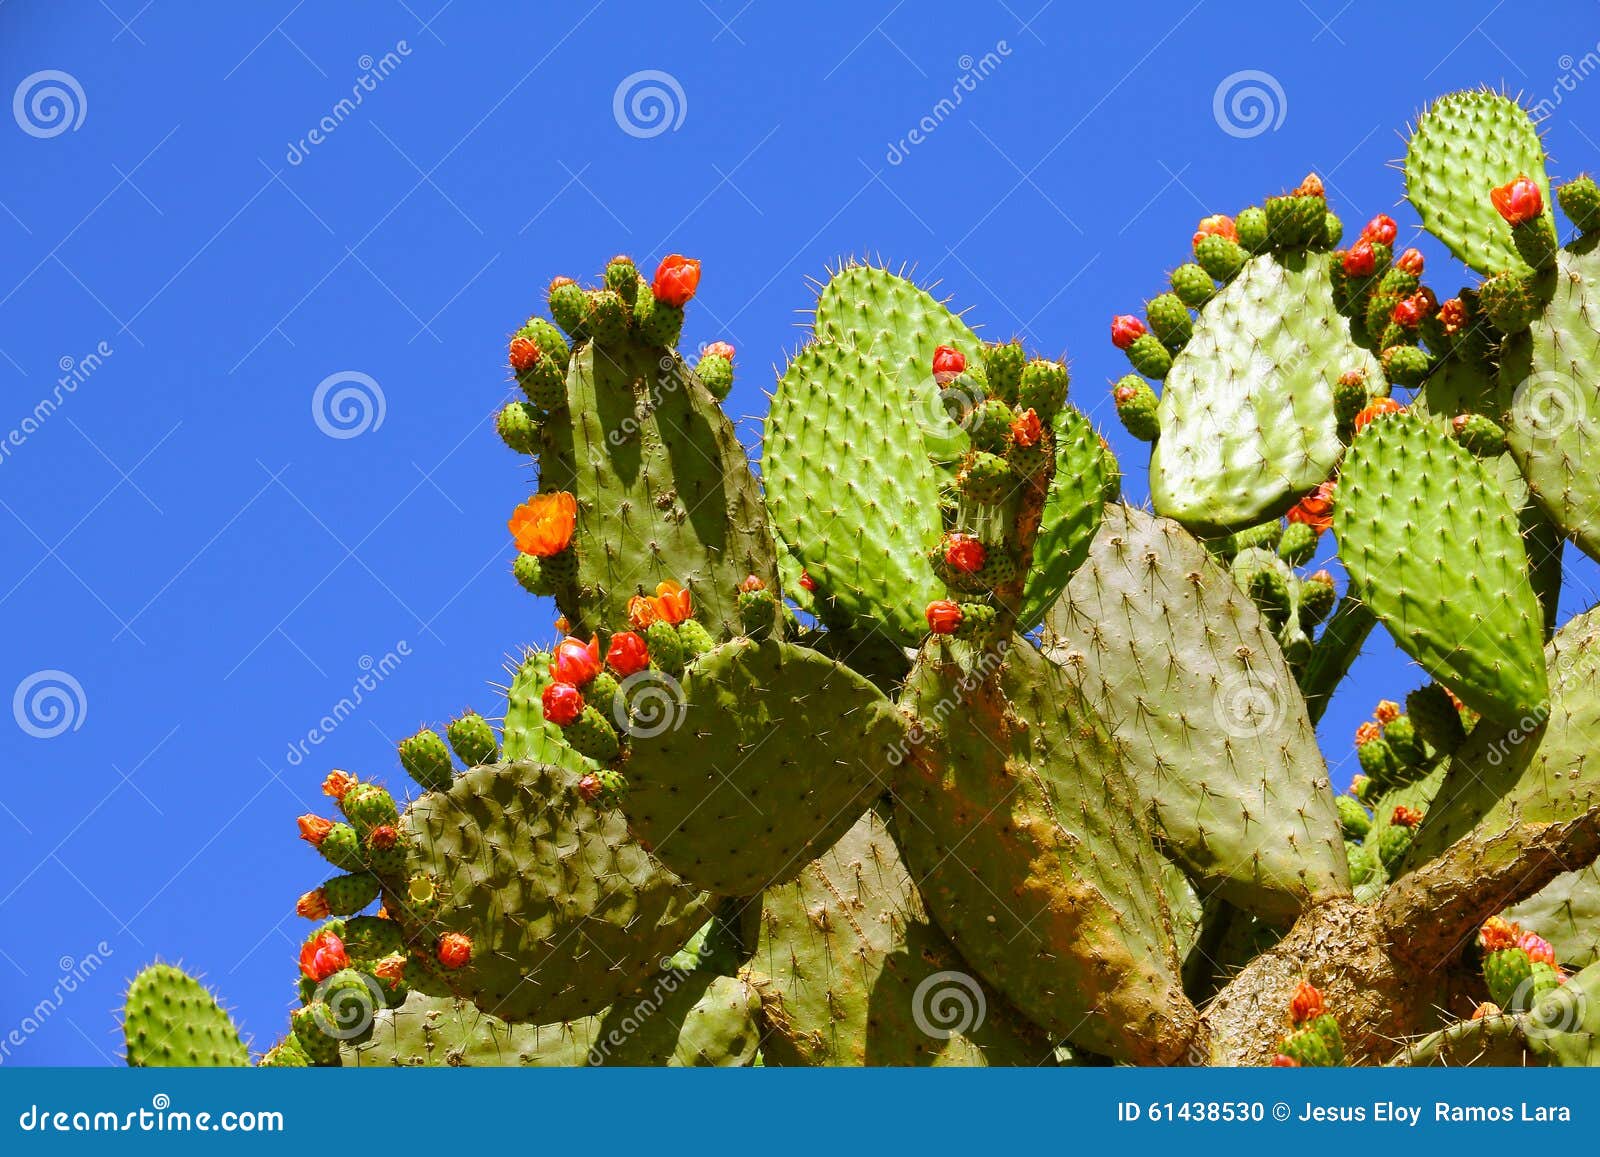 nopales or prickly pear cactus with a blue sky and flowers i